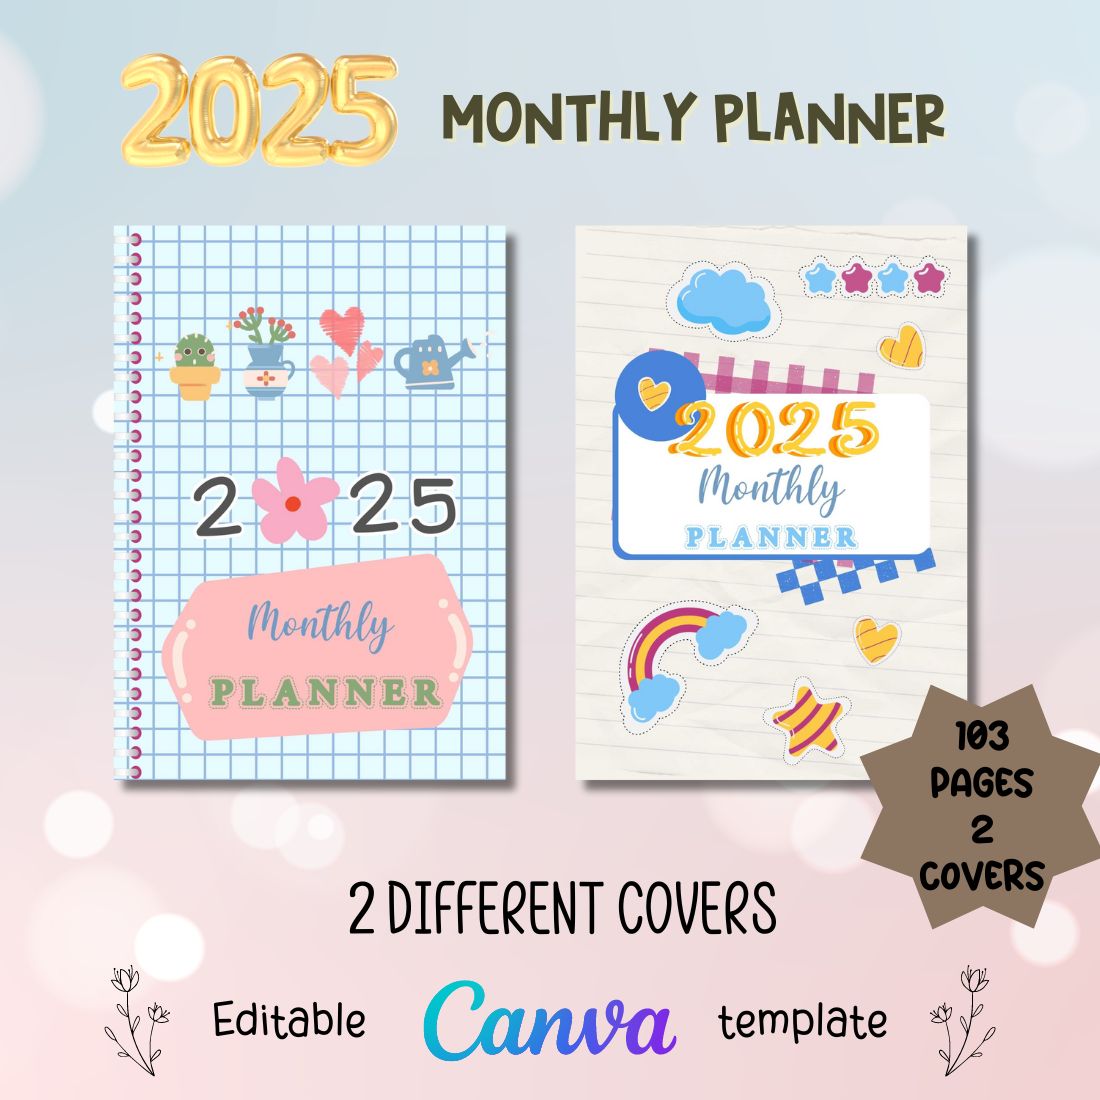 2025 Monthly Planner - Canva Template preview image.